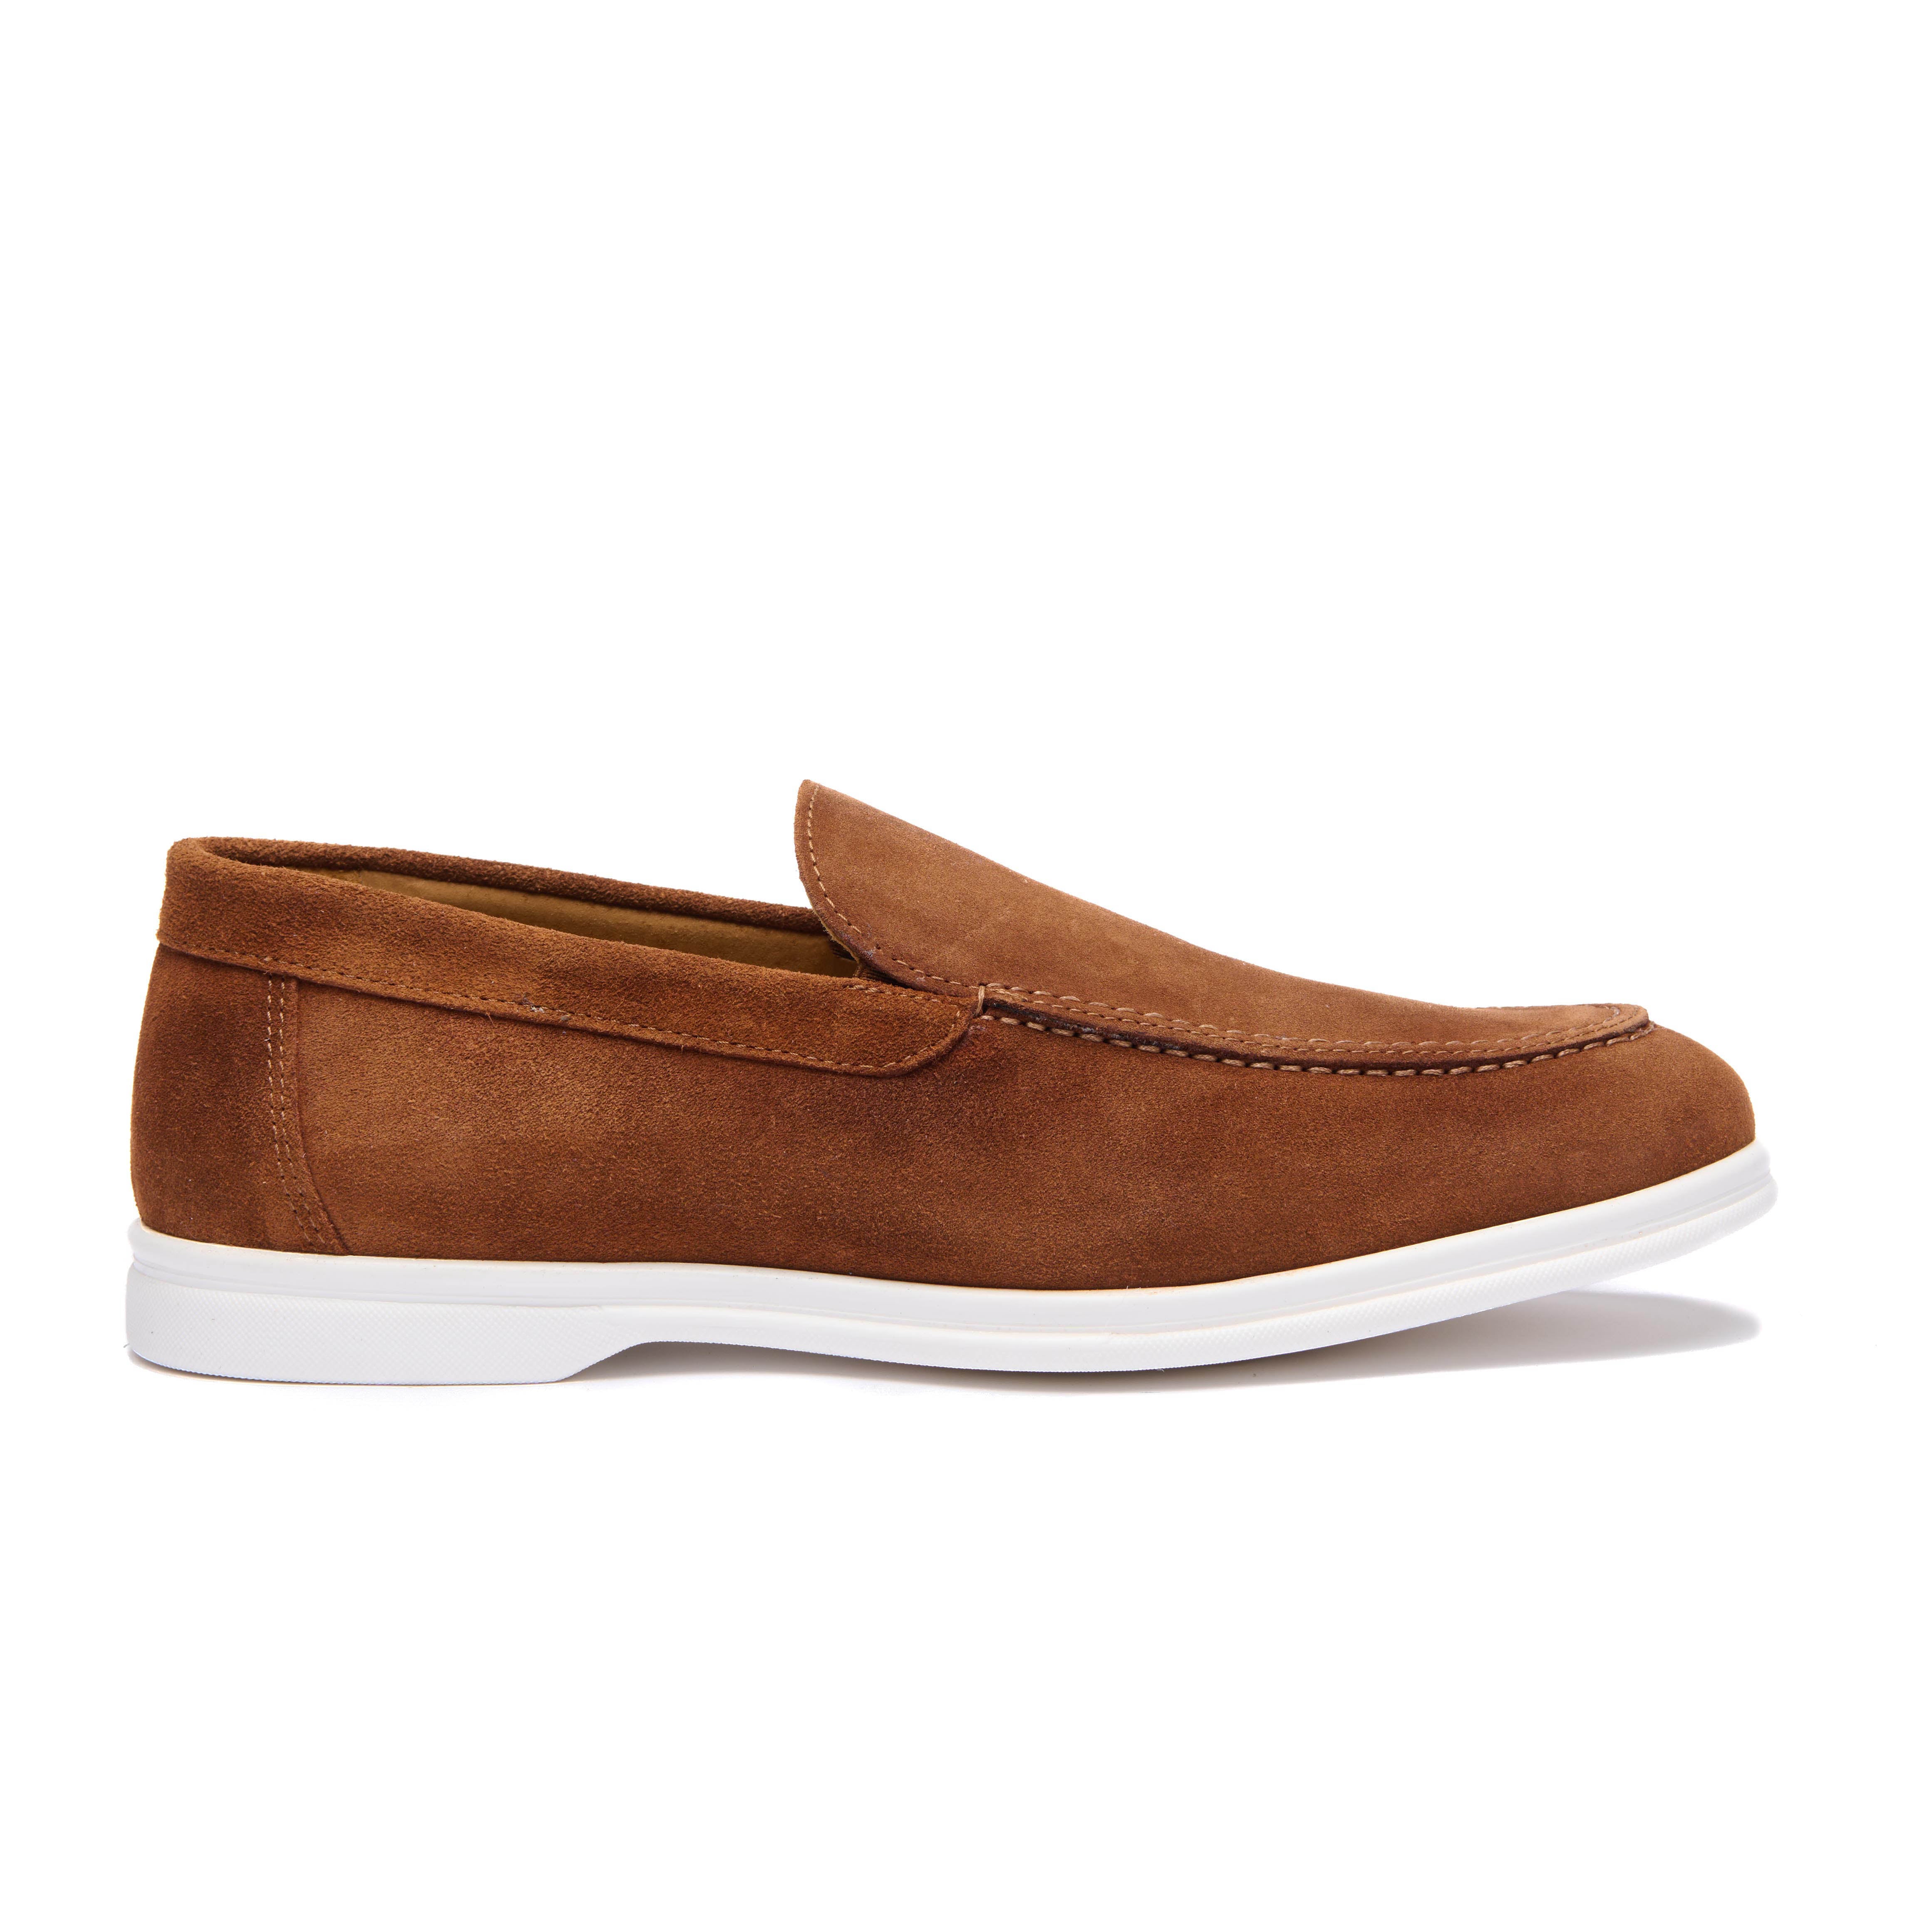 <tc>Moccasins Made in Italy</tc>